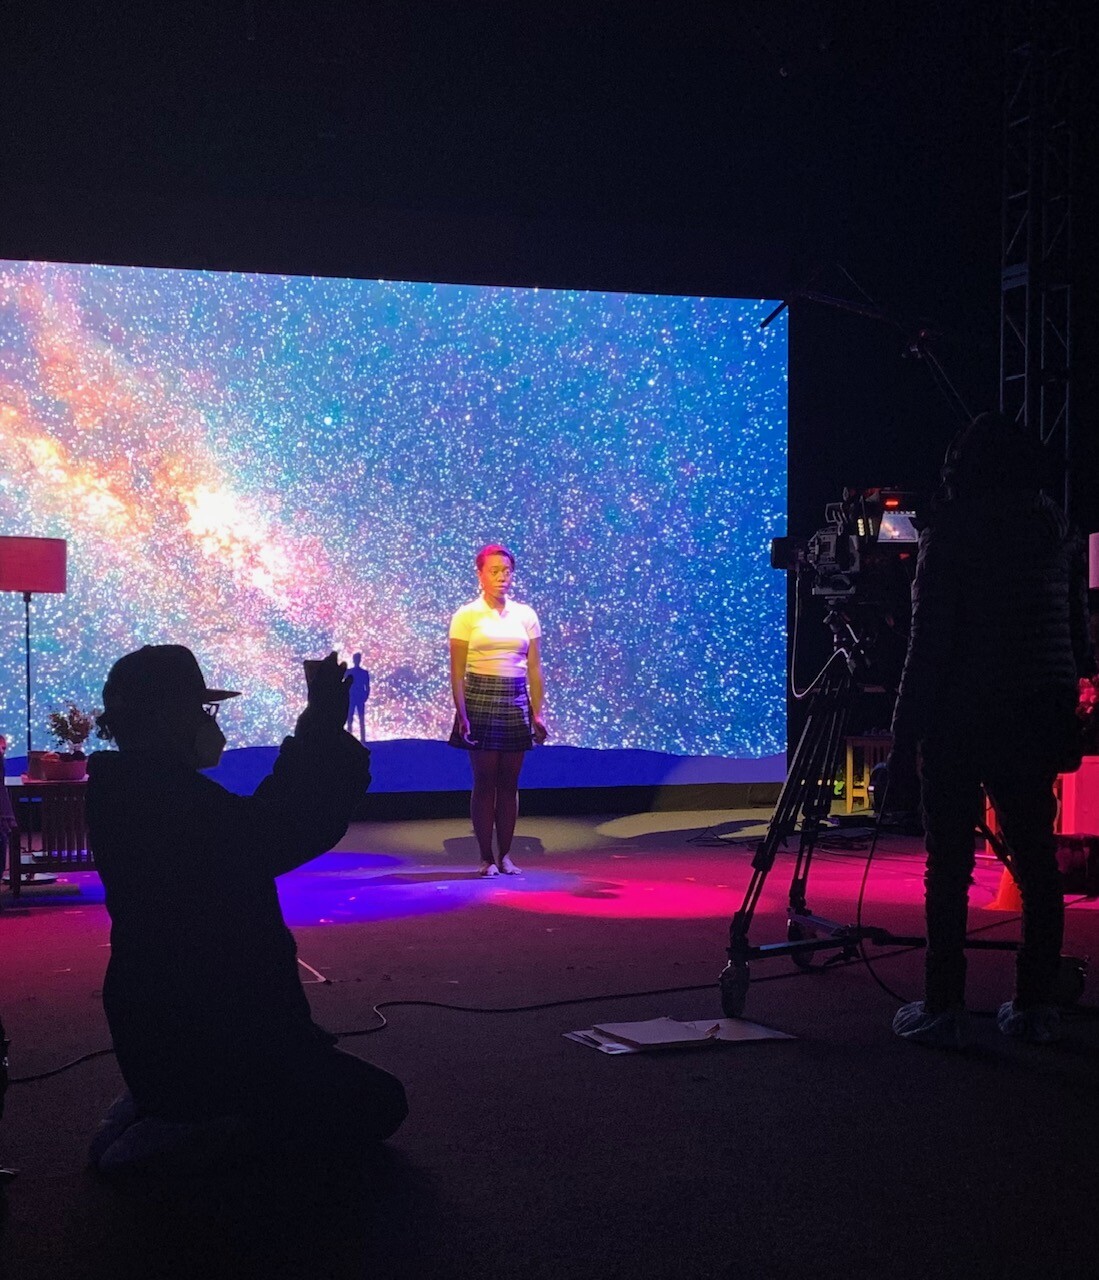 A performer stands in front of a projection screen while crew members set up cameras and lights.